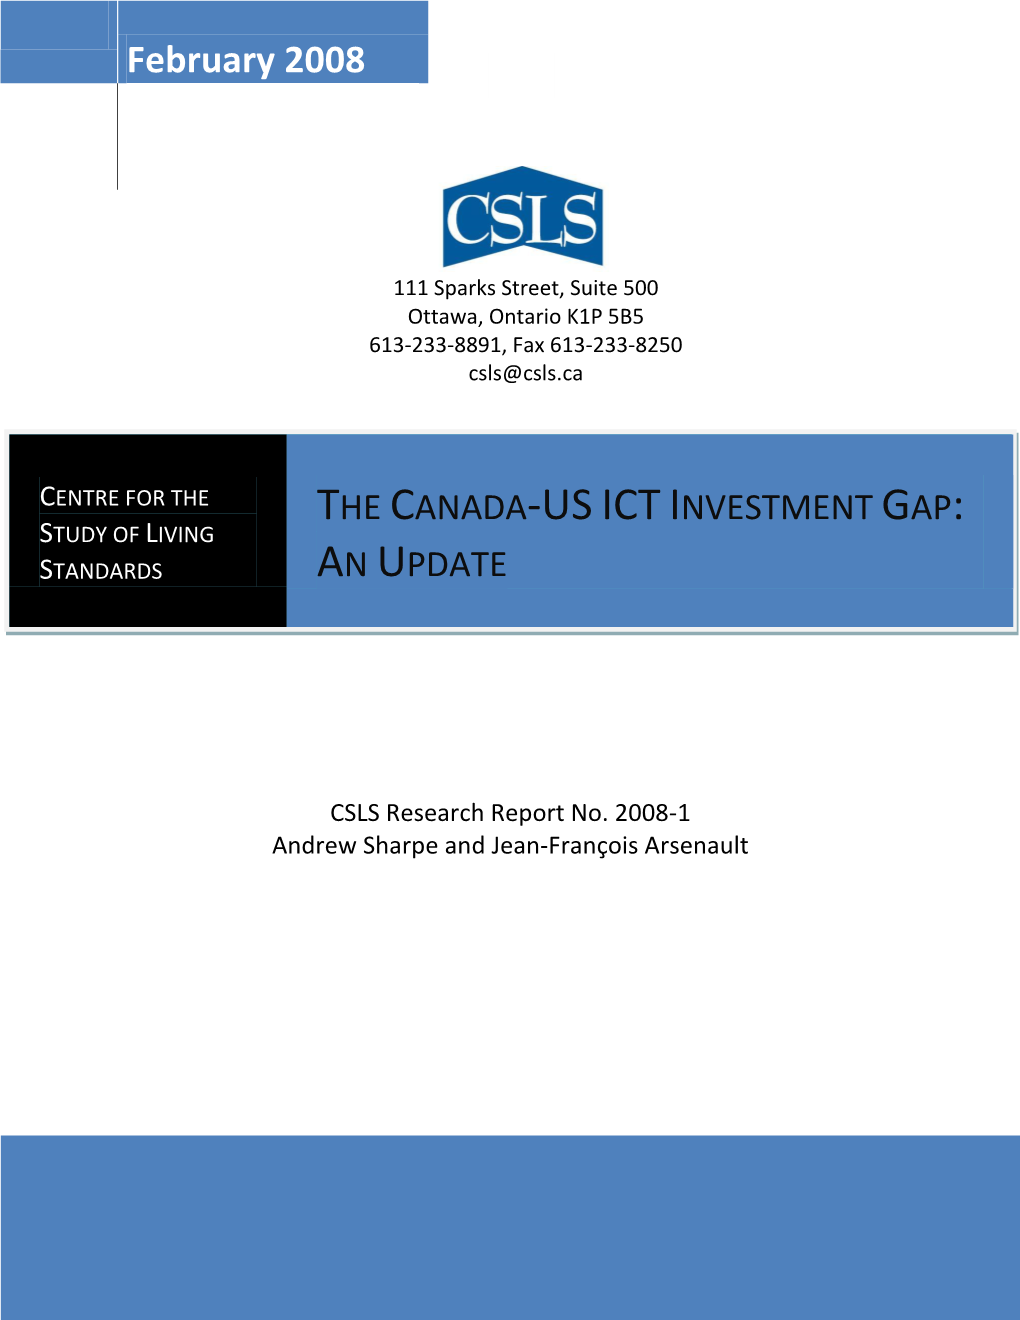 The Canada-Us Ict Investment Gap: Study of Living Standards an Update